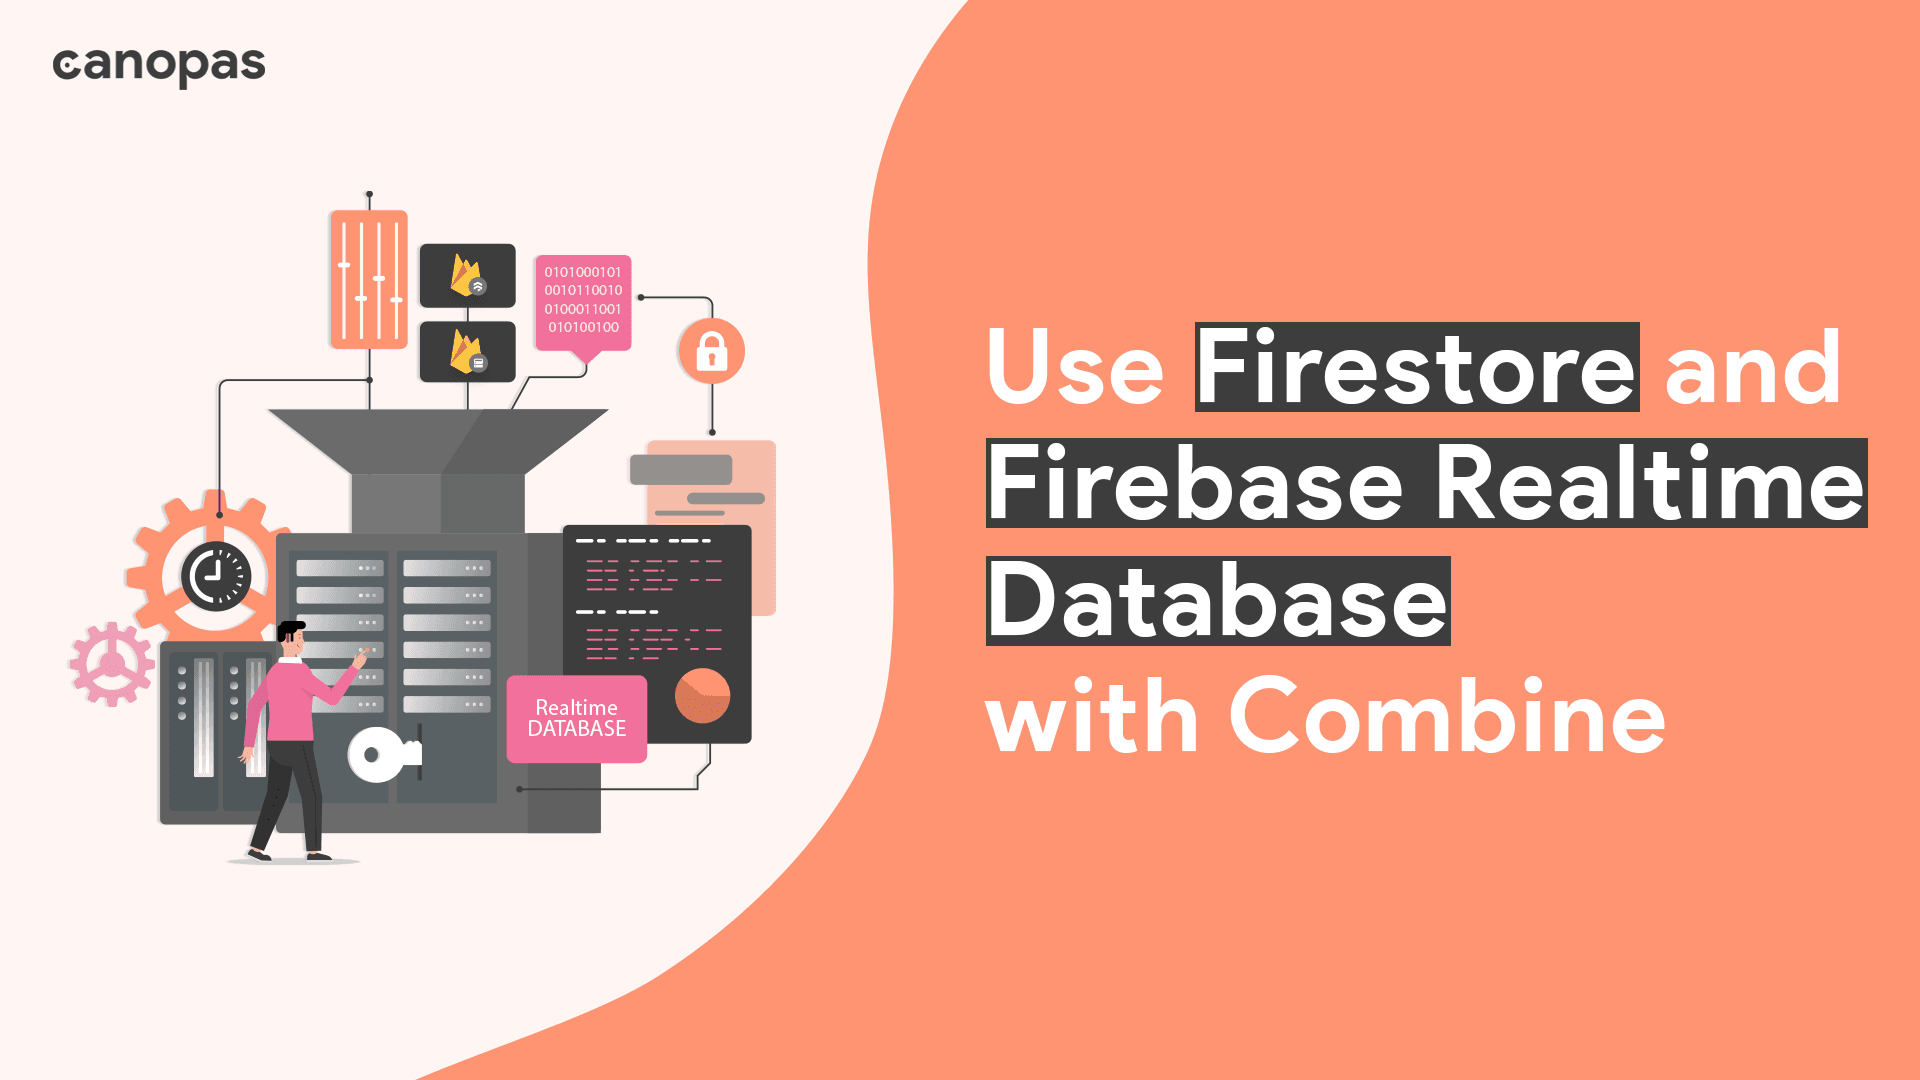 Firestore and Firebase Realtime Database